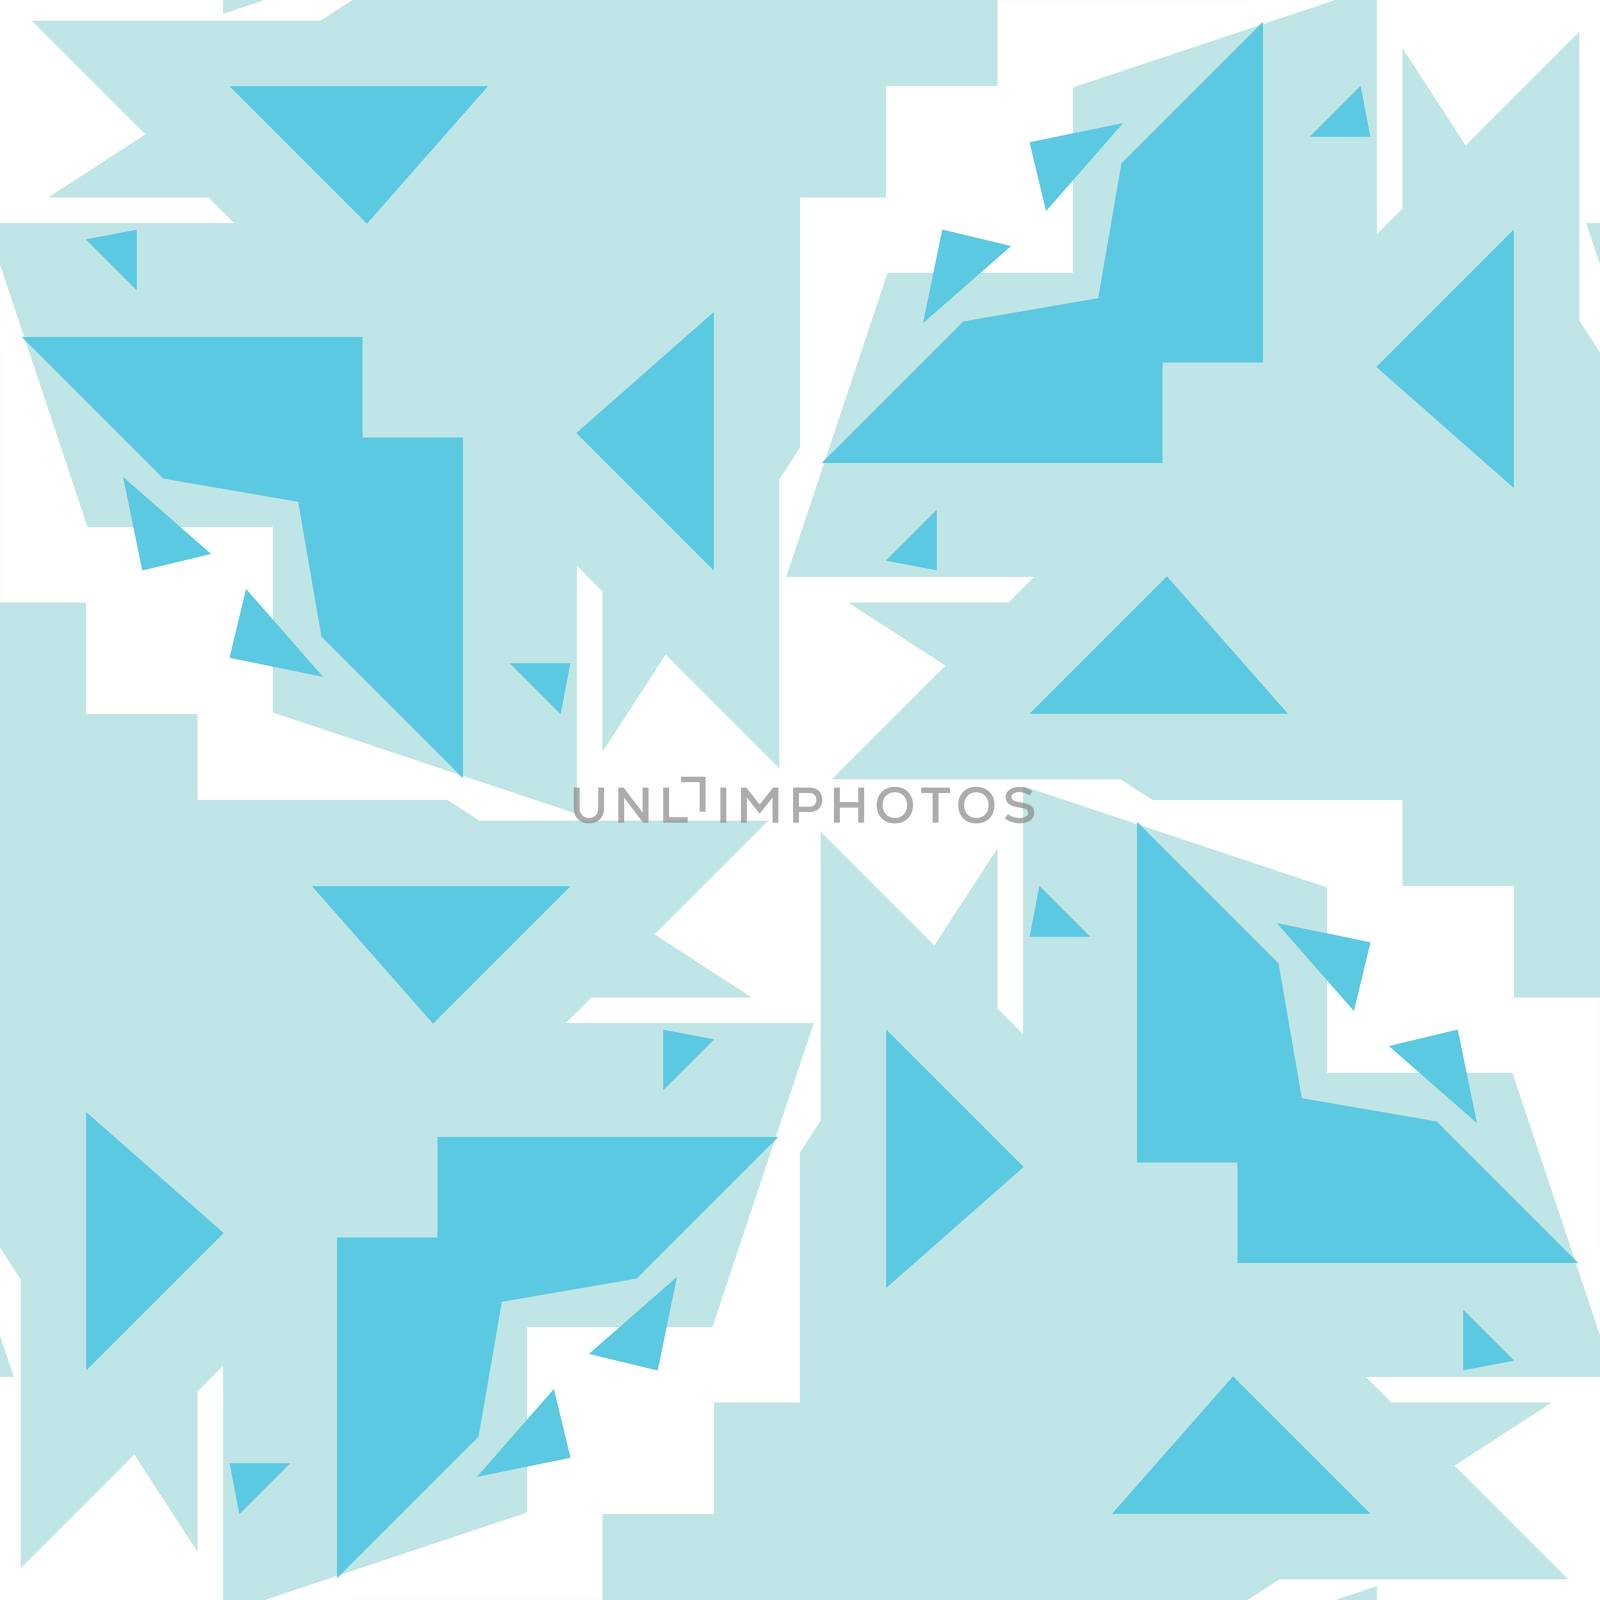 Seamless background pattern of various blue triangles over white